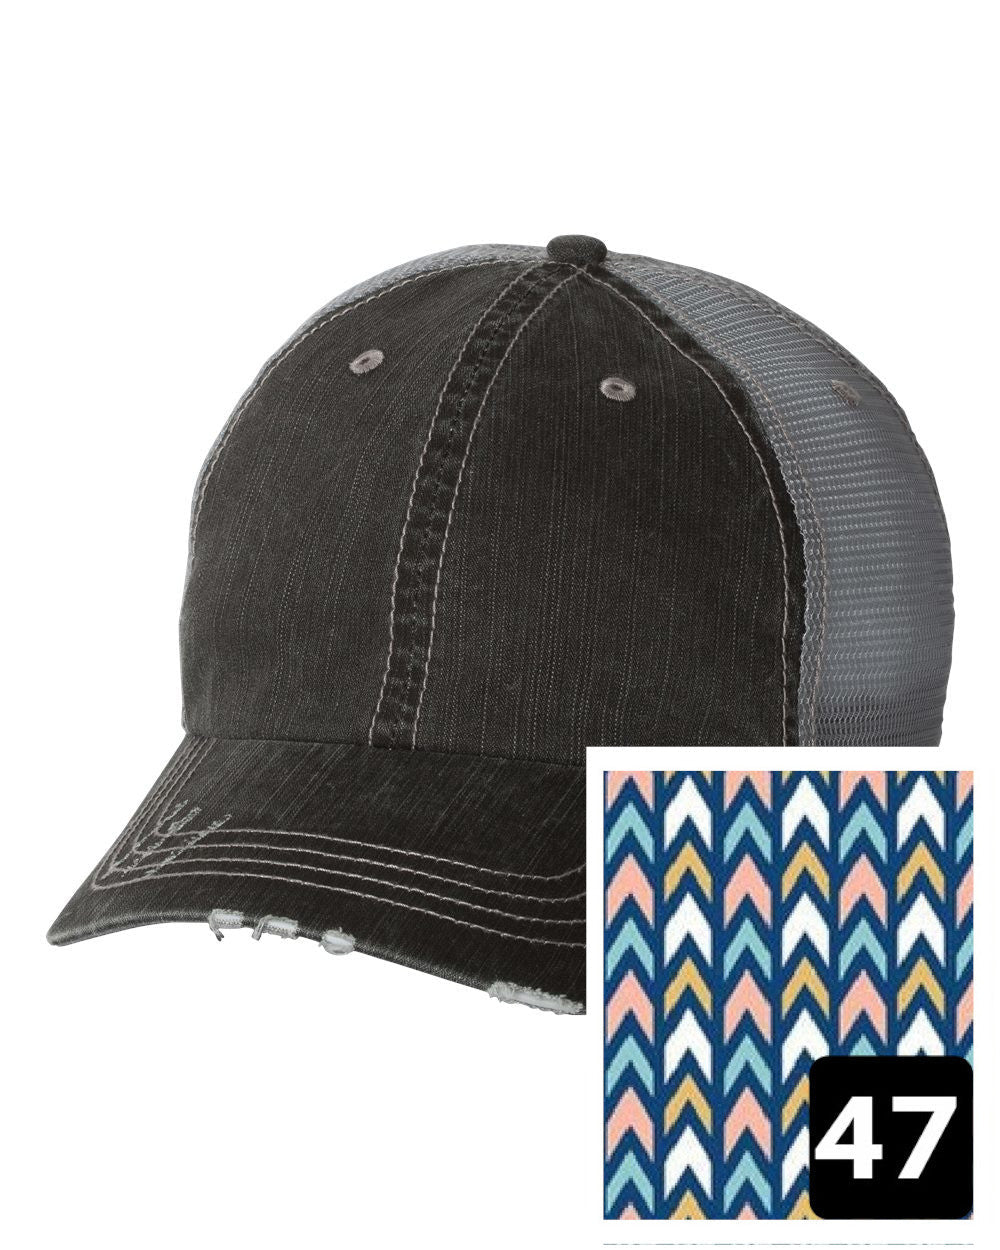 gray distressed trucker hat with pink trellis fabric state of Georgia